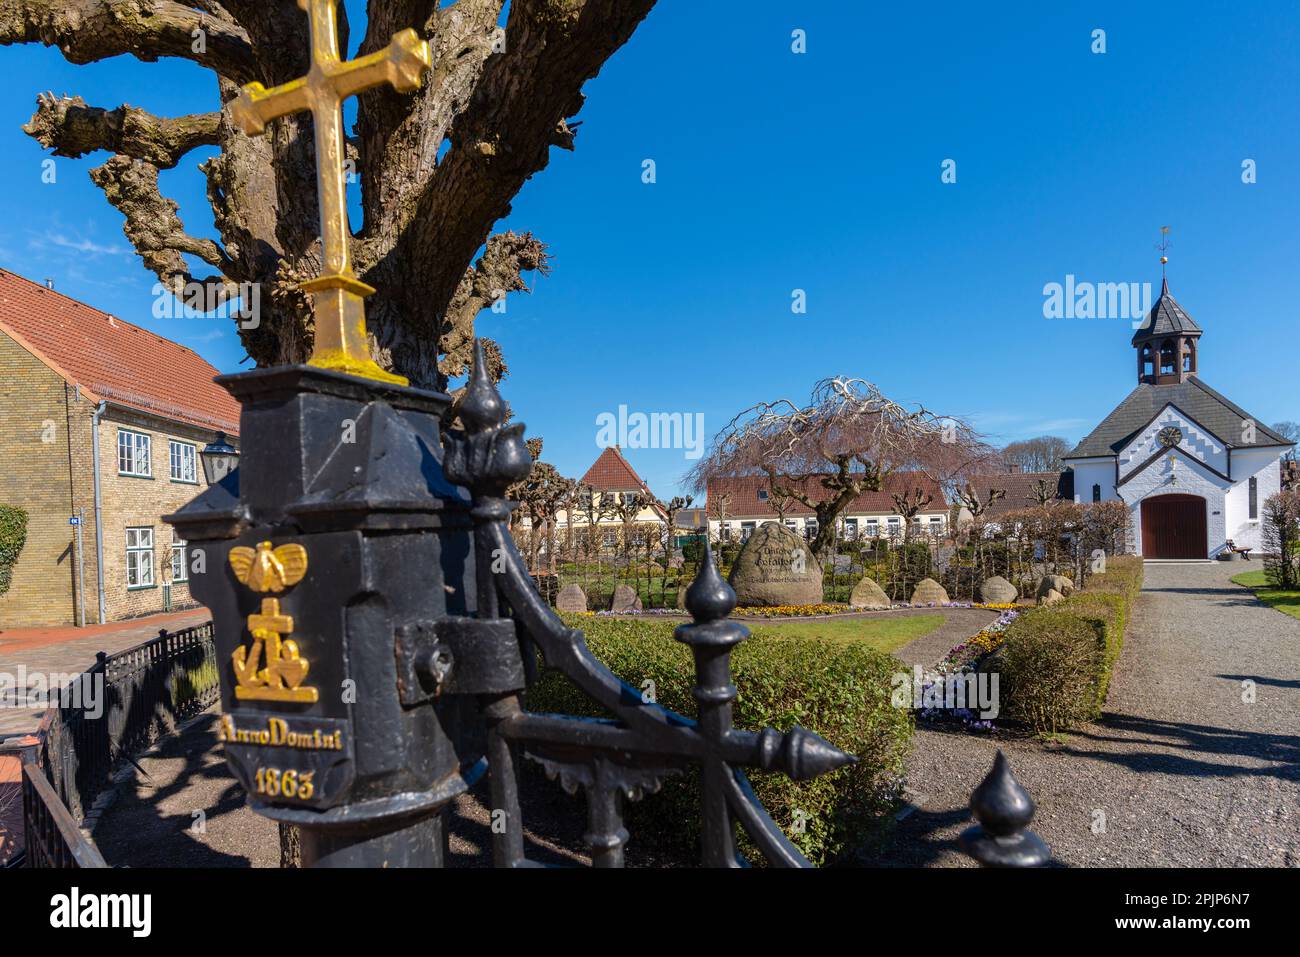 Chapel and historic cemetery of 1863, old fishing village of Holm, Schleswig city on the Schlei Fjord, Schleswig-Holstein, Northern Germany, Europe Stock Photo